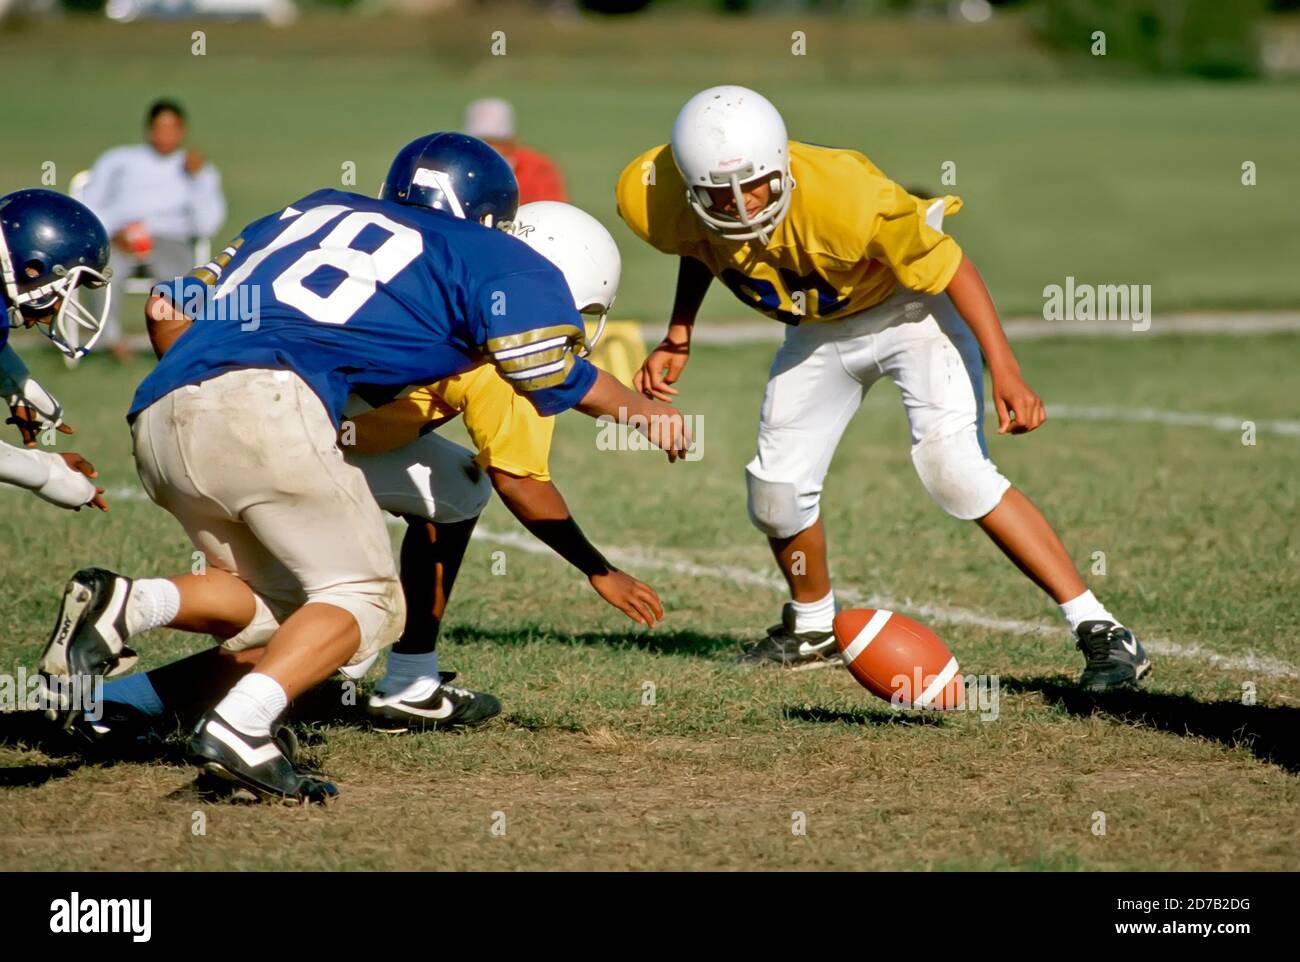 Junior varsity high school football action - the ball is fumbled during this play Stock Photo